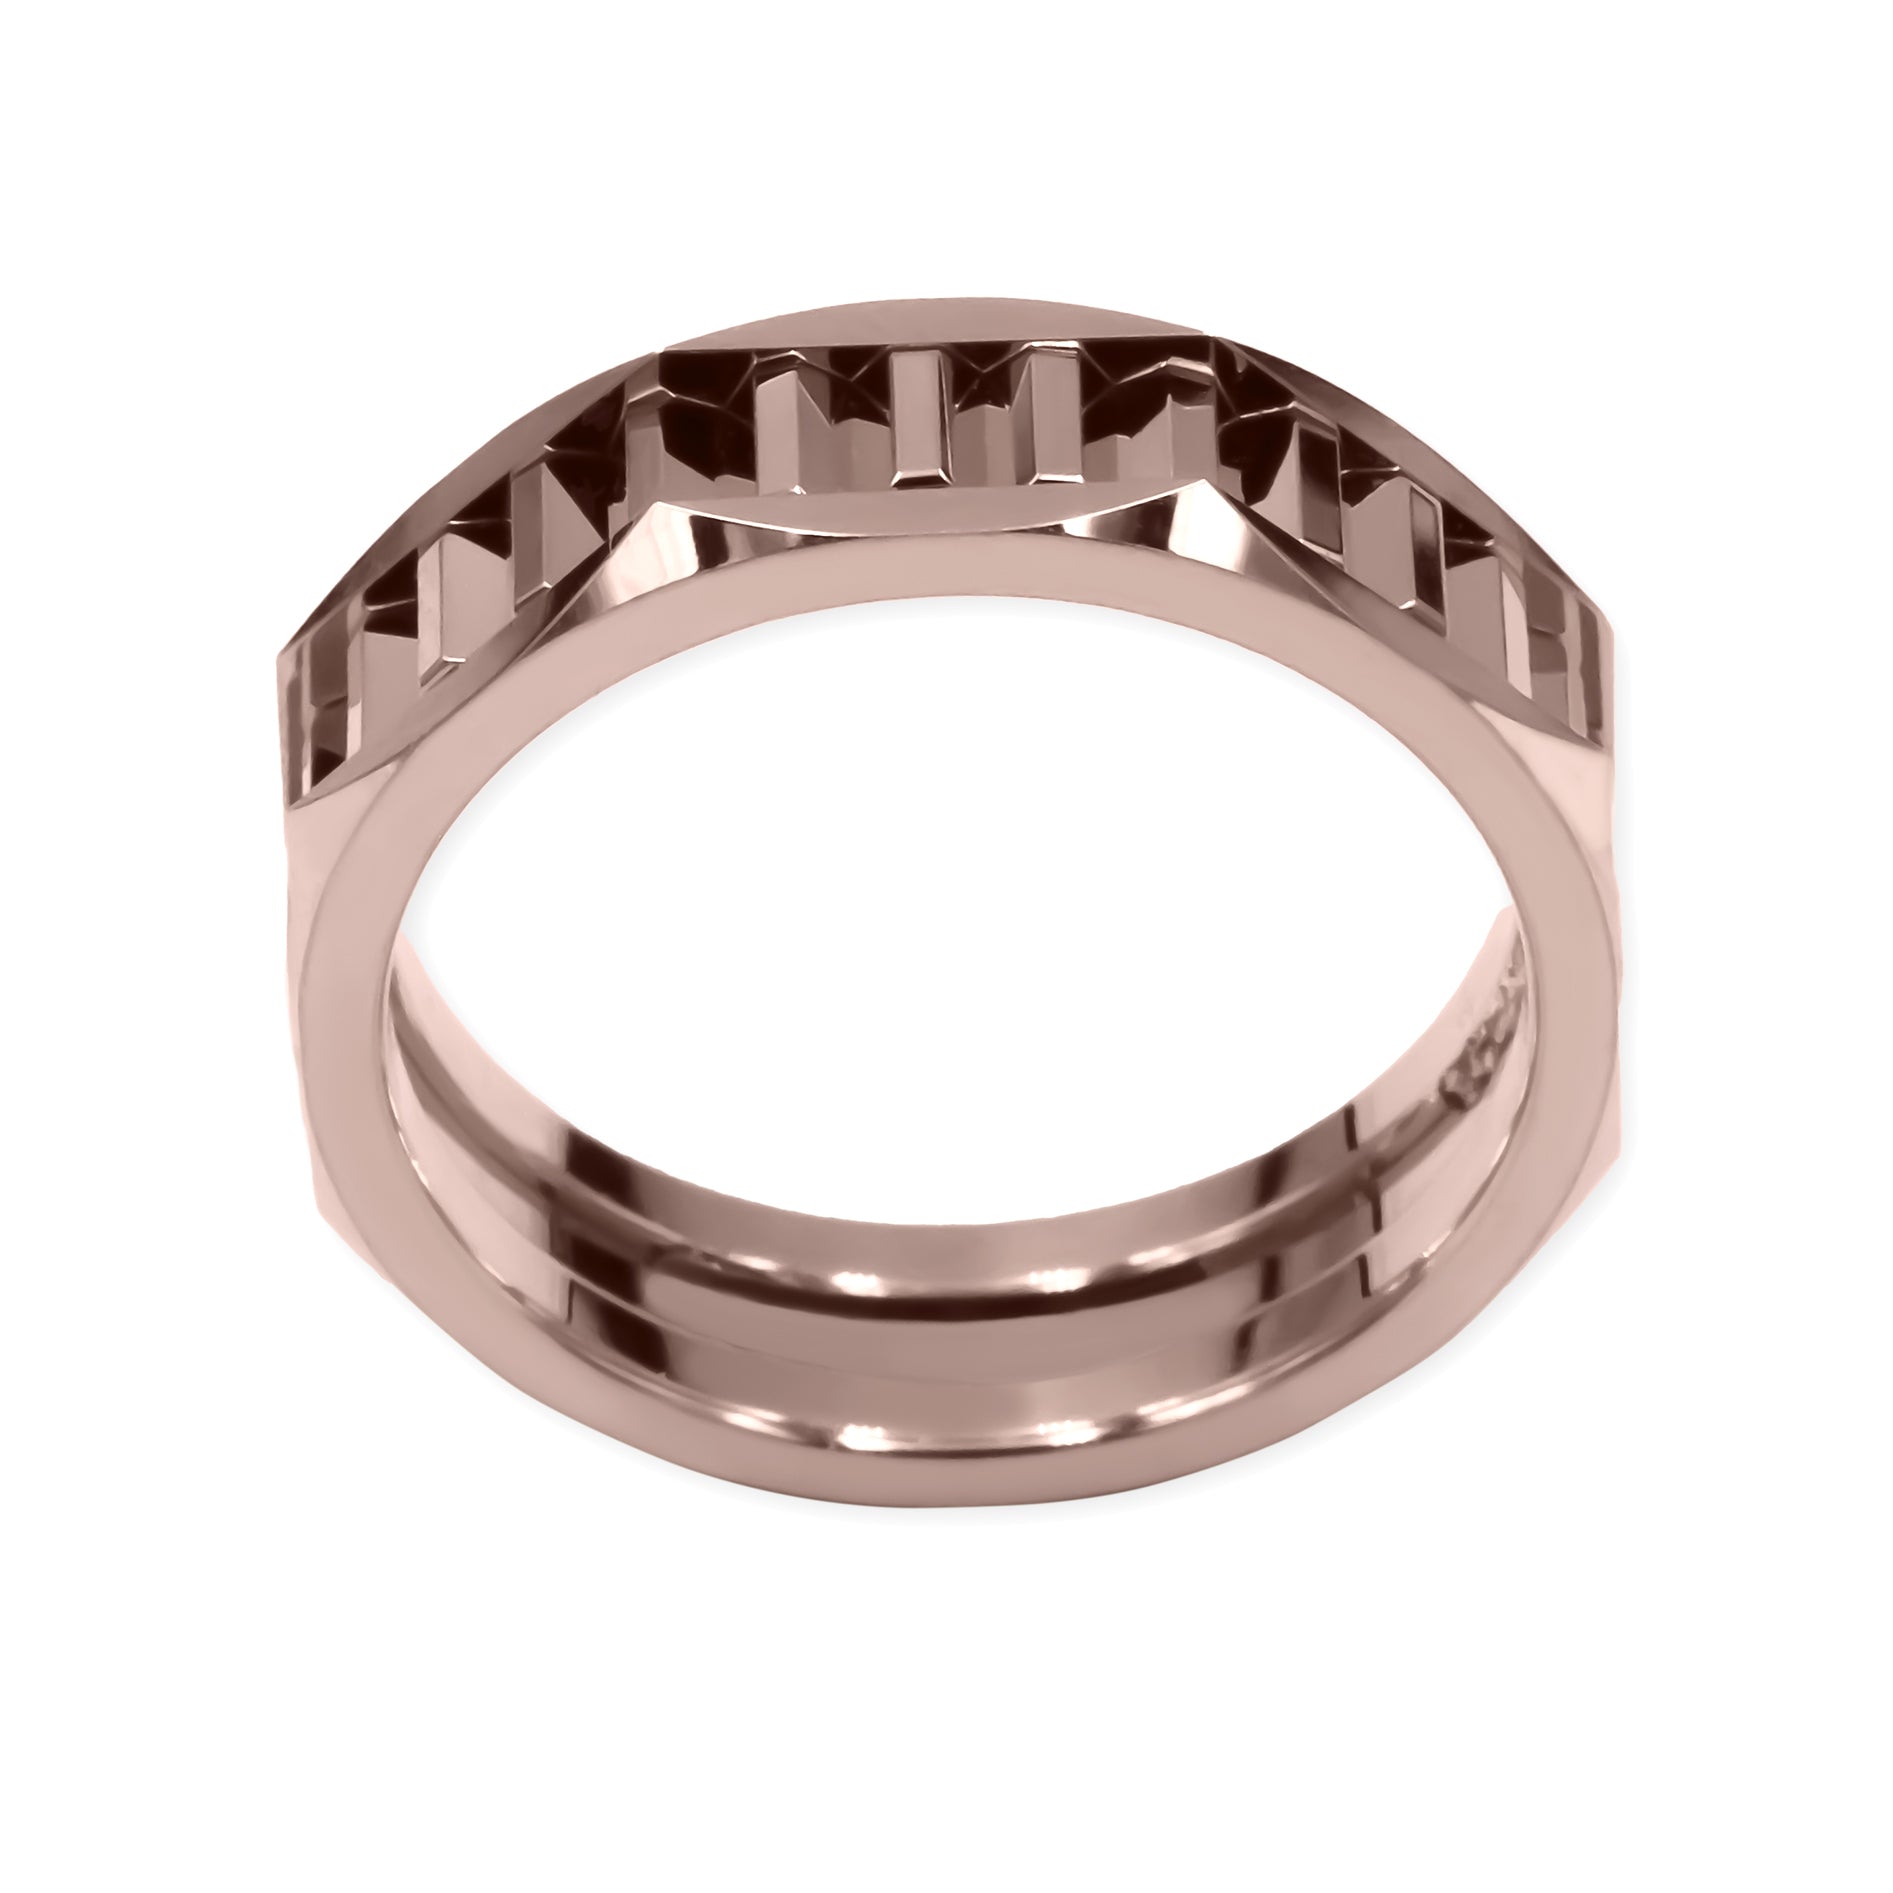 Ring CRUSH 6mm gears red gold 18k 750